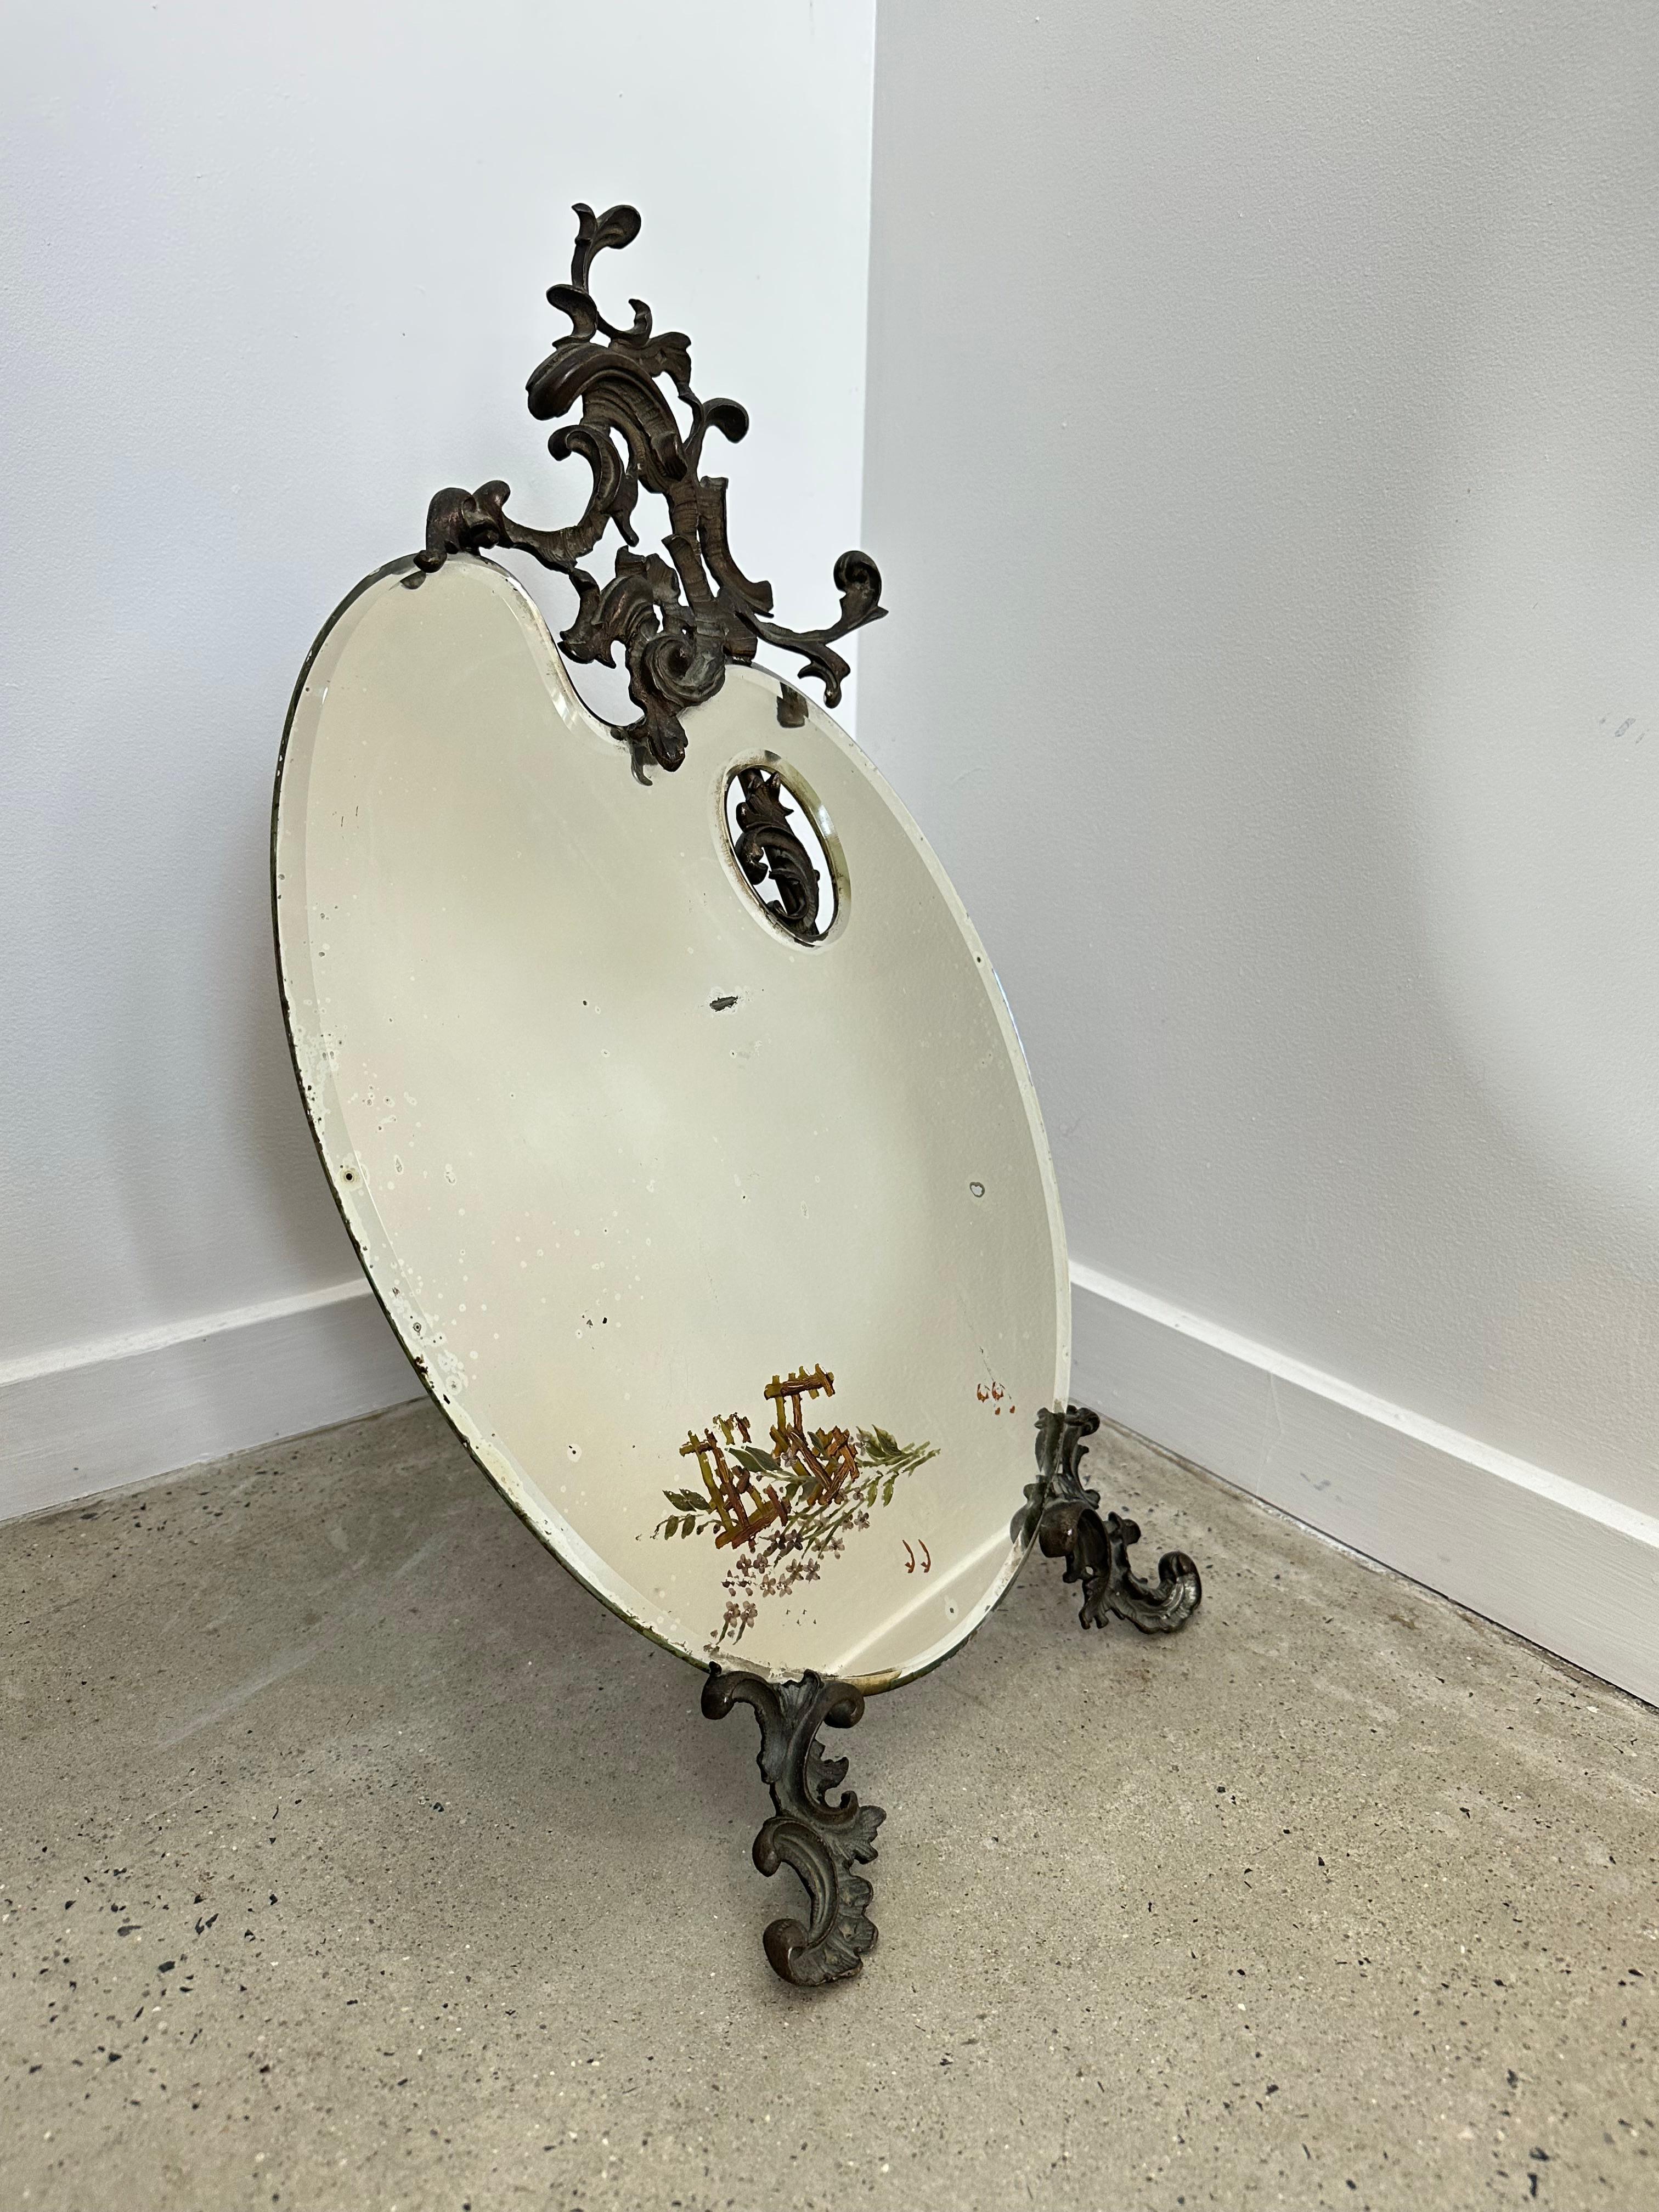 Liberty style brass mirrors are mirrors that are designed in the Liberty style, which is an artistic movement that emerged in England in the late 19th century. The movement was named after the famous Liberty & Co. department store in London, which